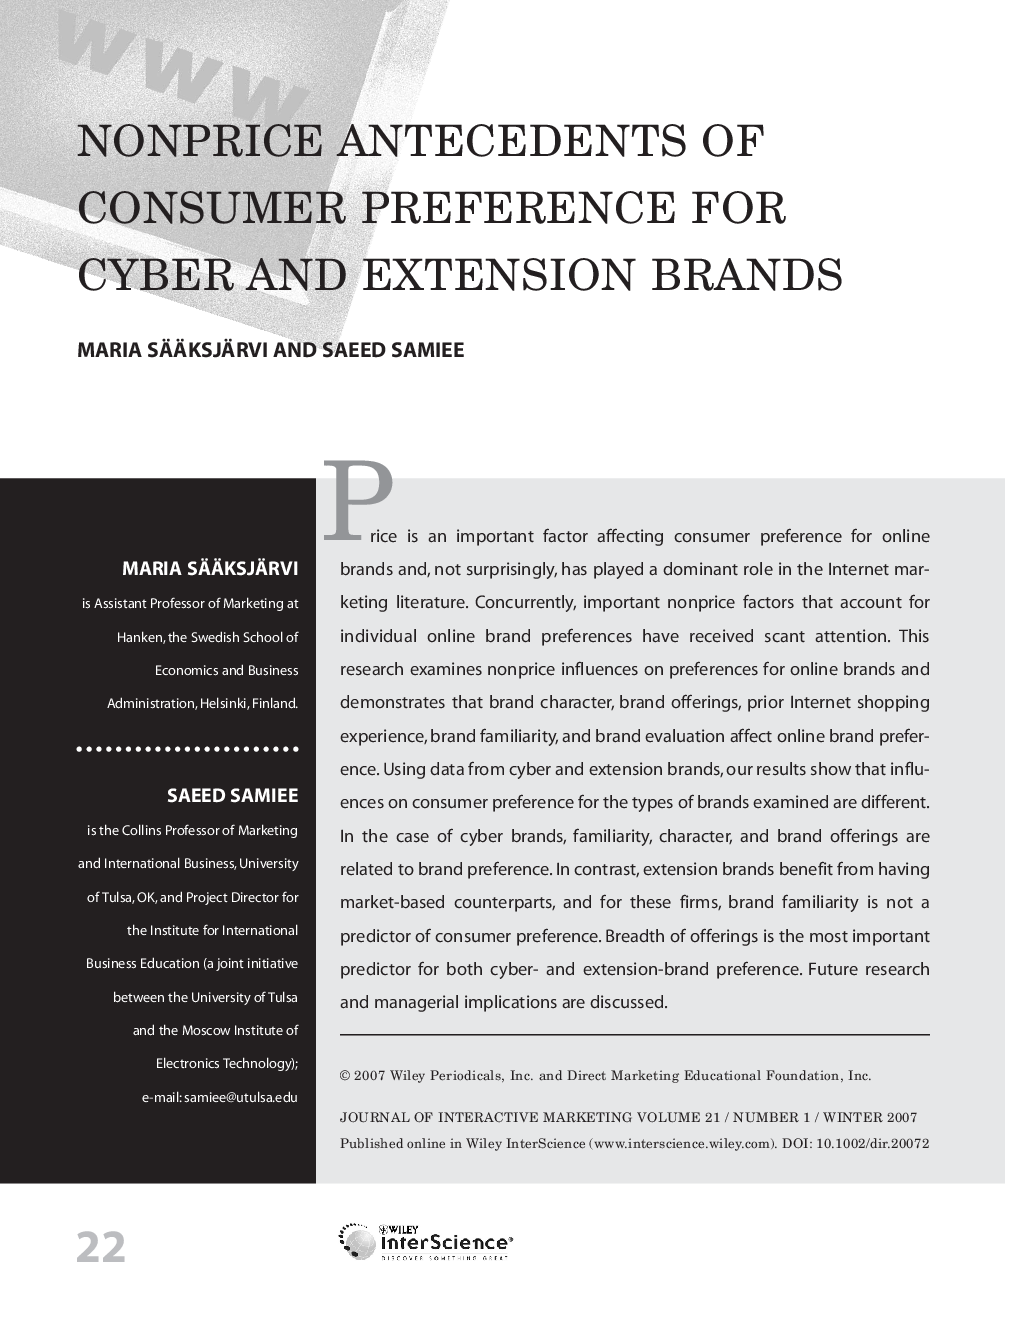 Nonprice antecedents of consumer preference for cyber and extension brands